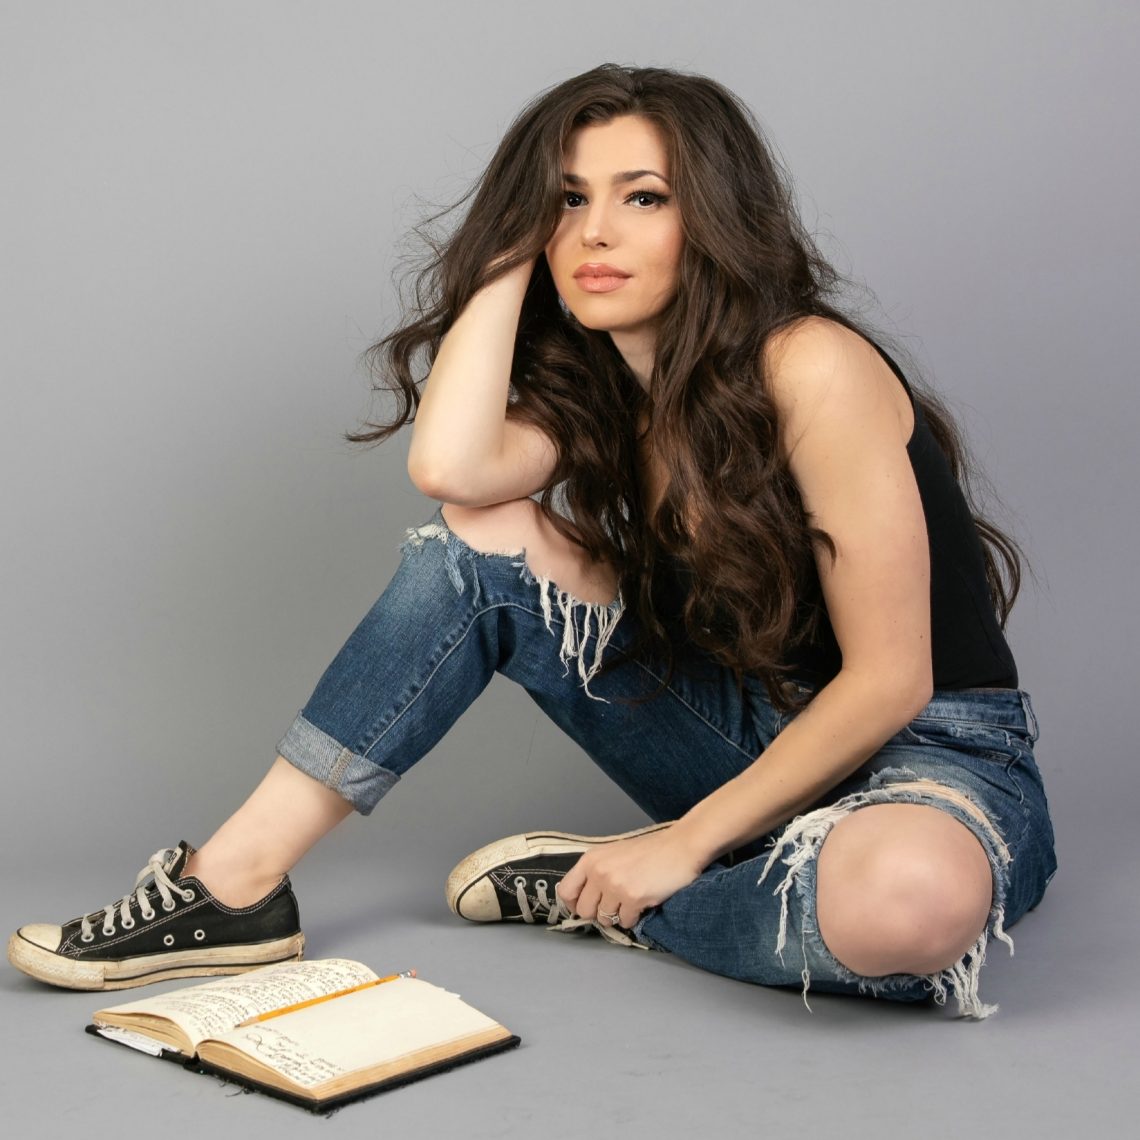 Jessica Lynn Releases Her Latest Single ‘Love Me That Way’